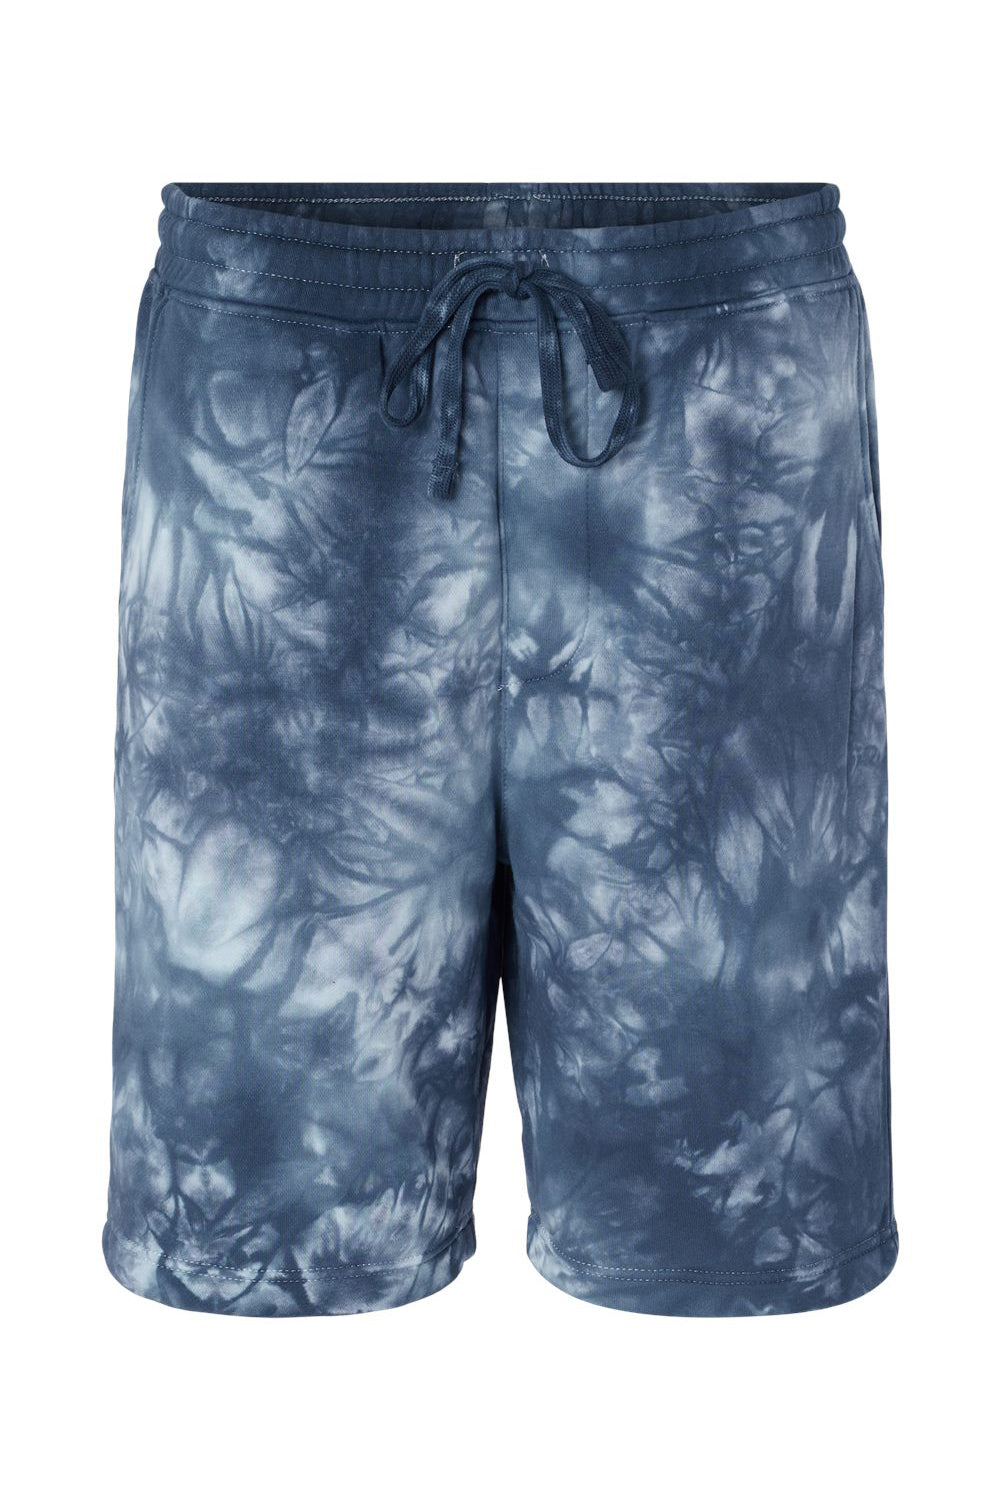 Independent Trading Co. PRM50STTD Mens Tie-Dye Fleece Shorts w/ Pockets Navy Blue Flat Front